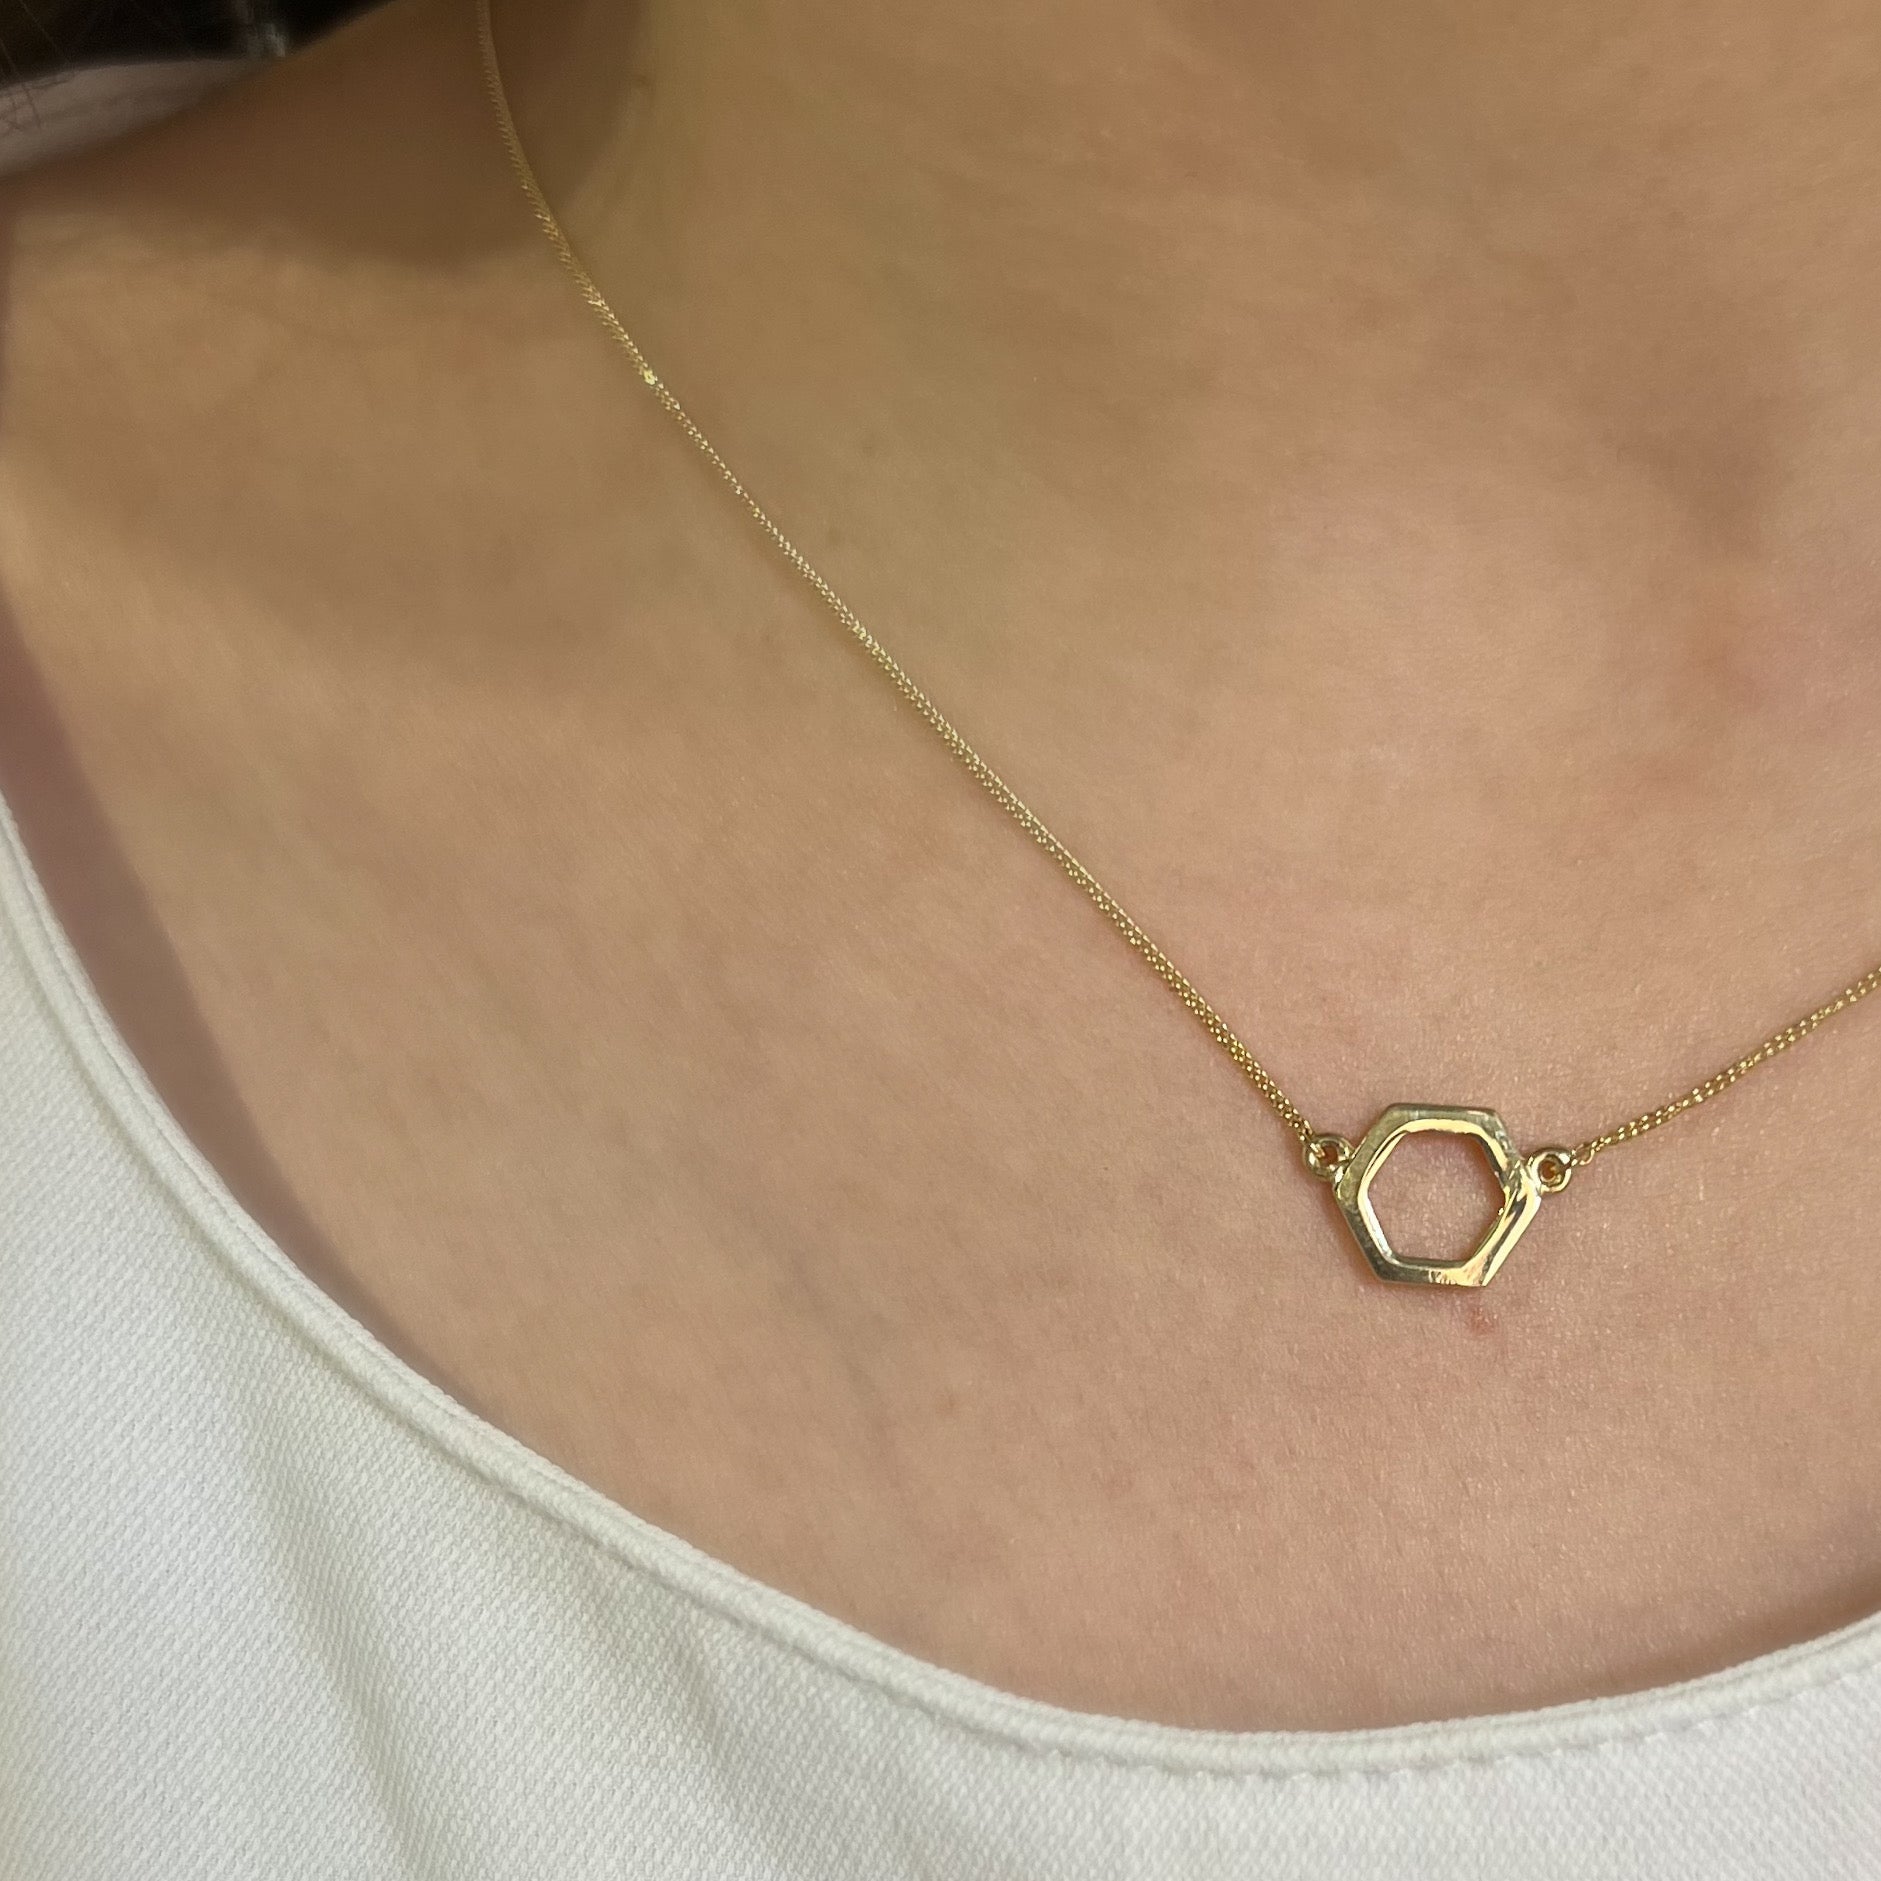 9ct Yellow Gold Hexagonal Necklace